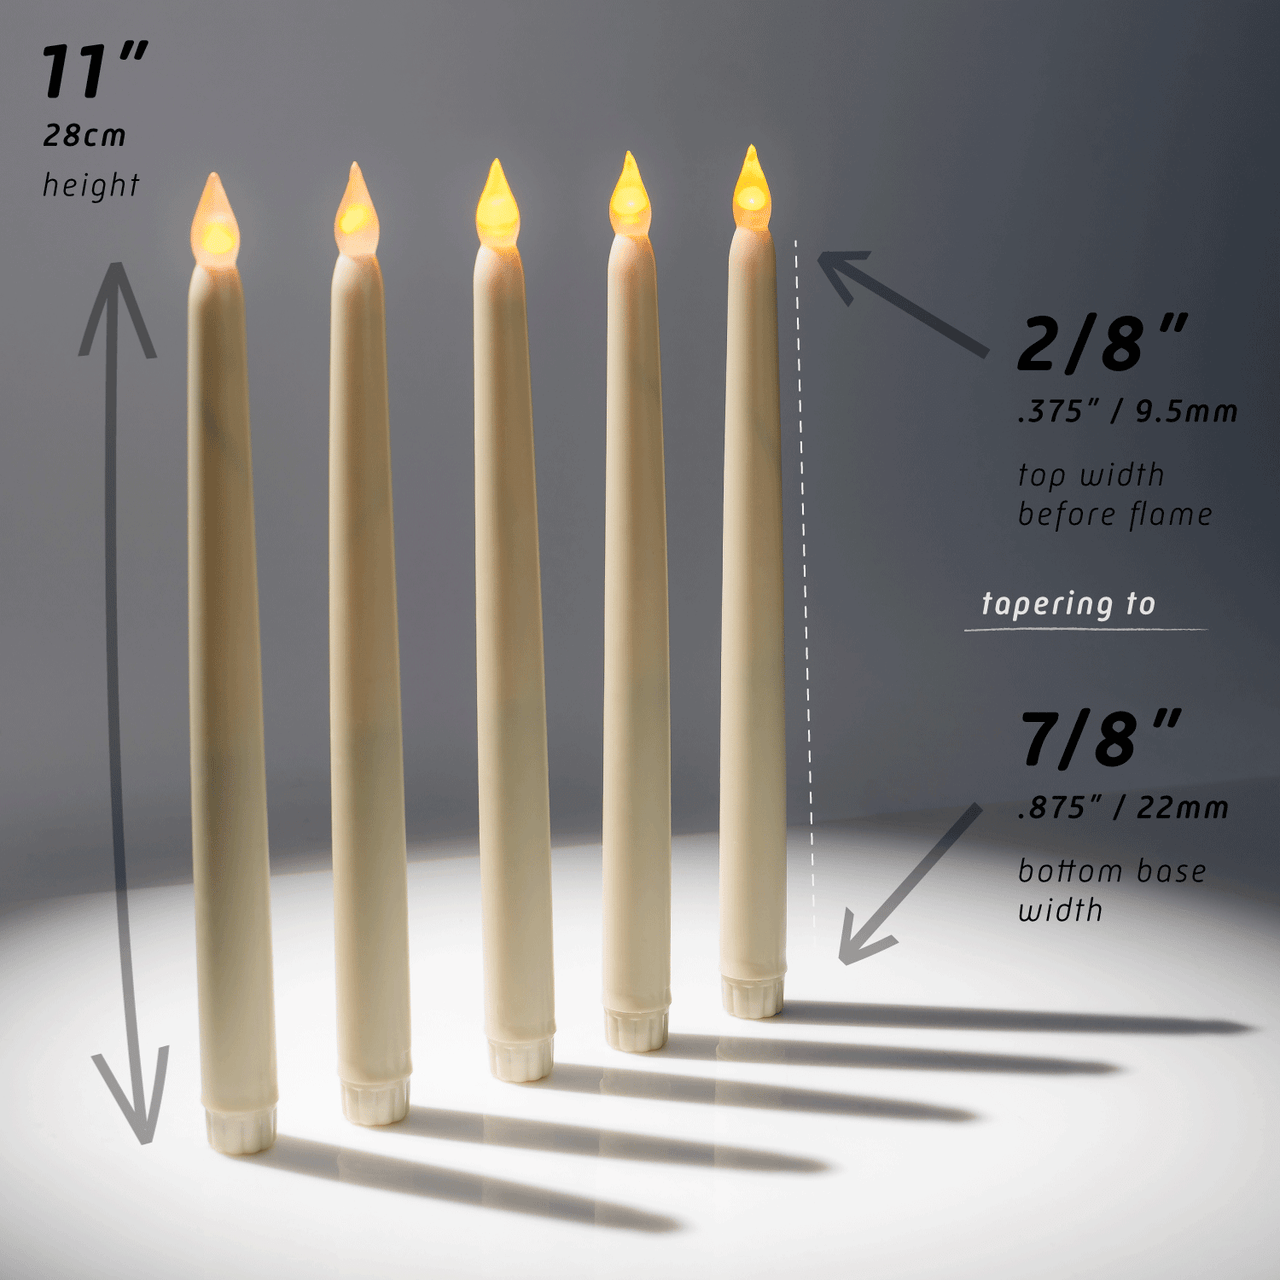 11" Ivory Taper Flameless LED Faux Wax Candle Lights 6 Pack - West Ivory LED Lighting 